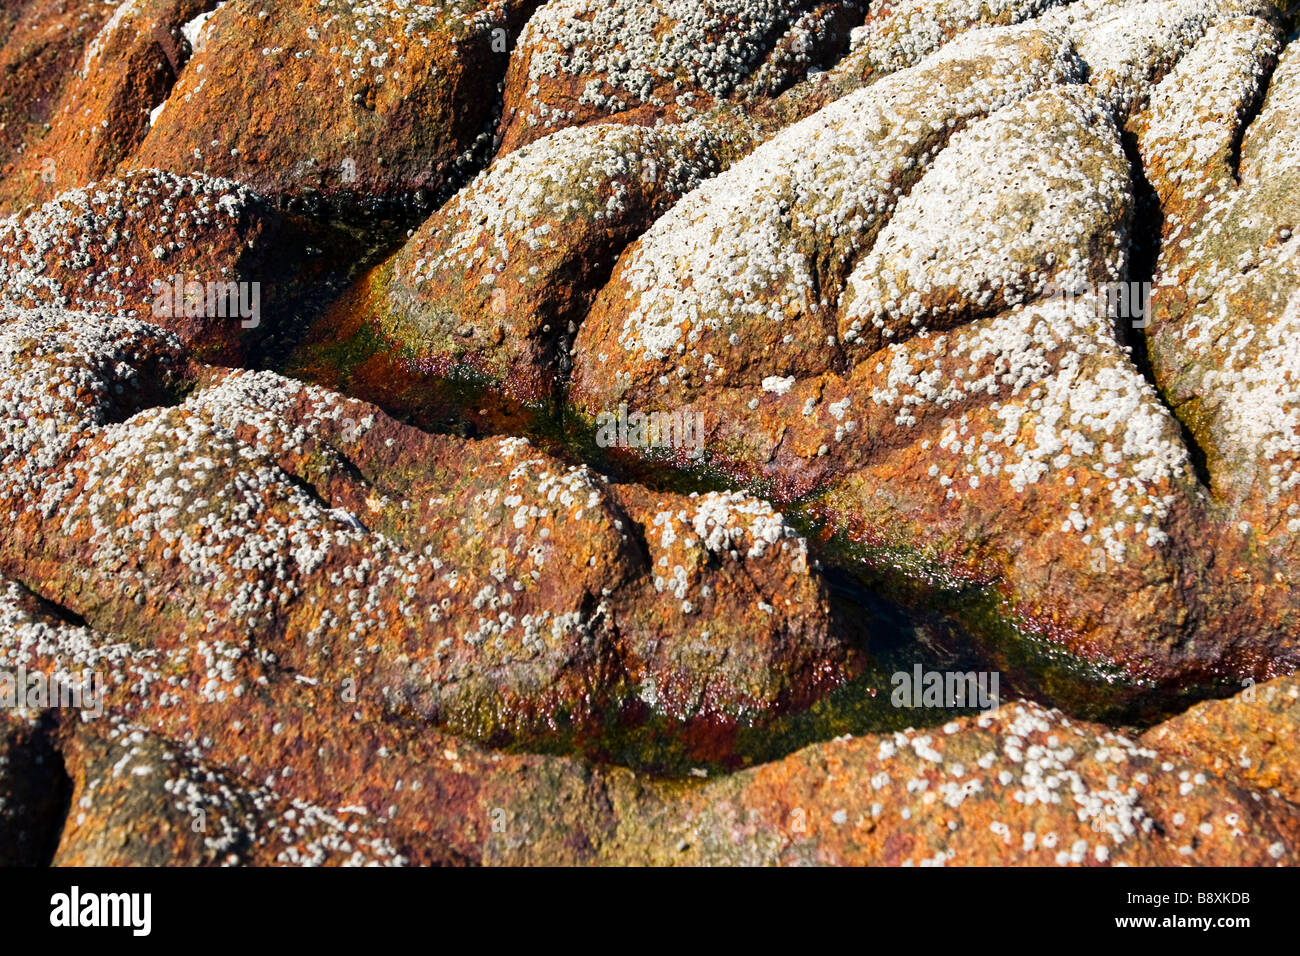 Big brown rock covered with tine shells on the beach closeup. Stock Photo